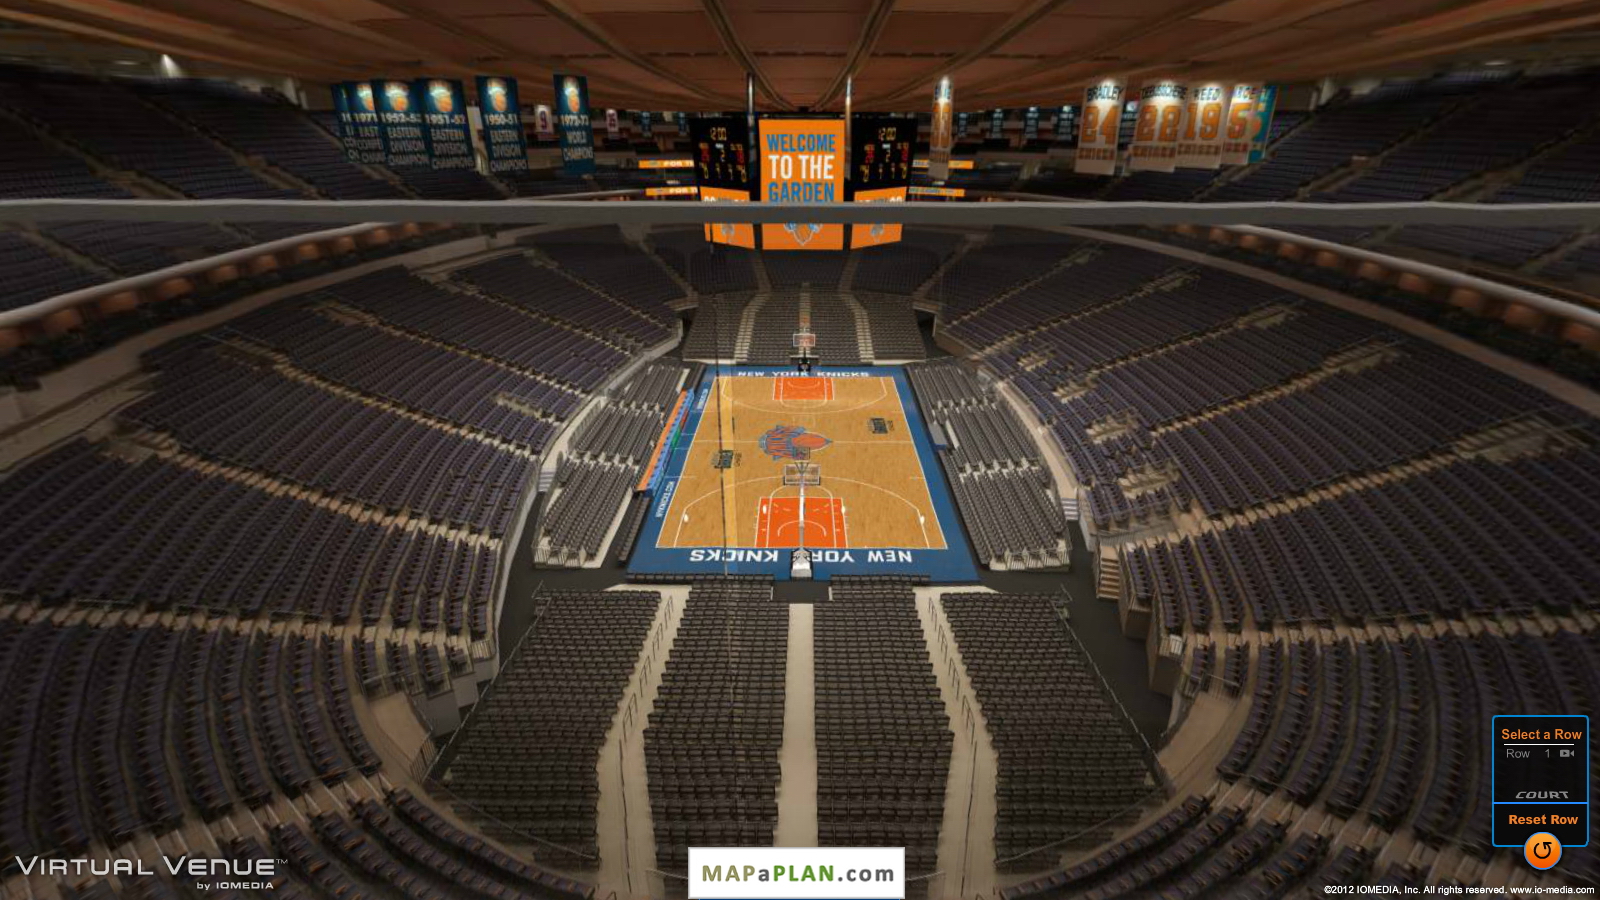 Madison square garden seating chart View from West Balcony section 20